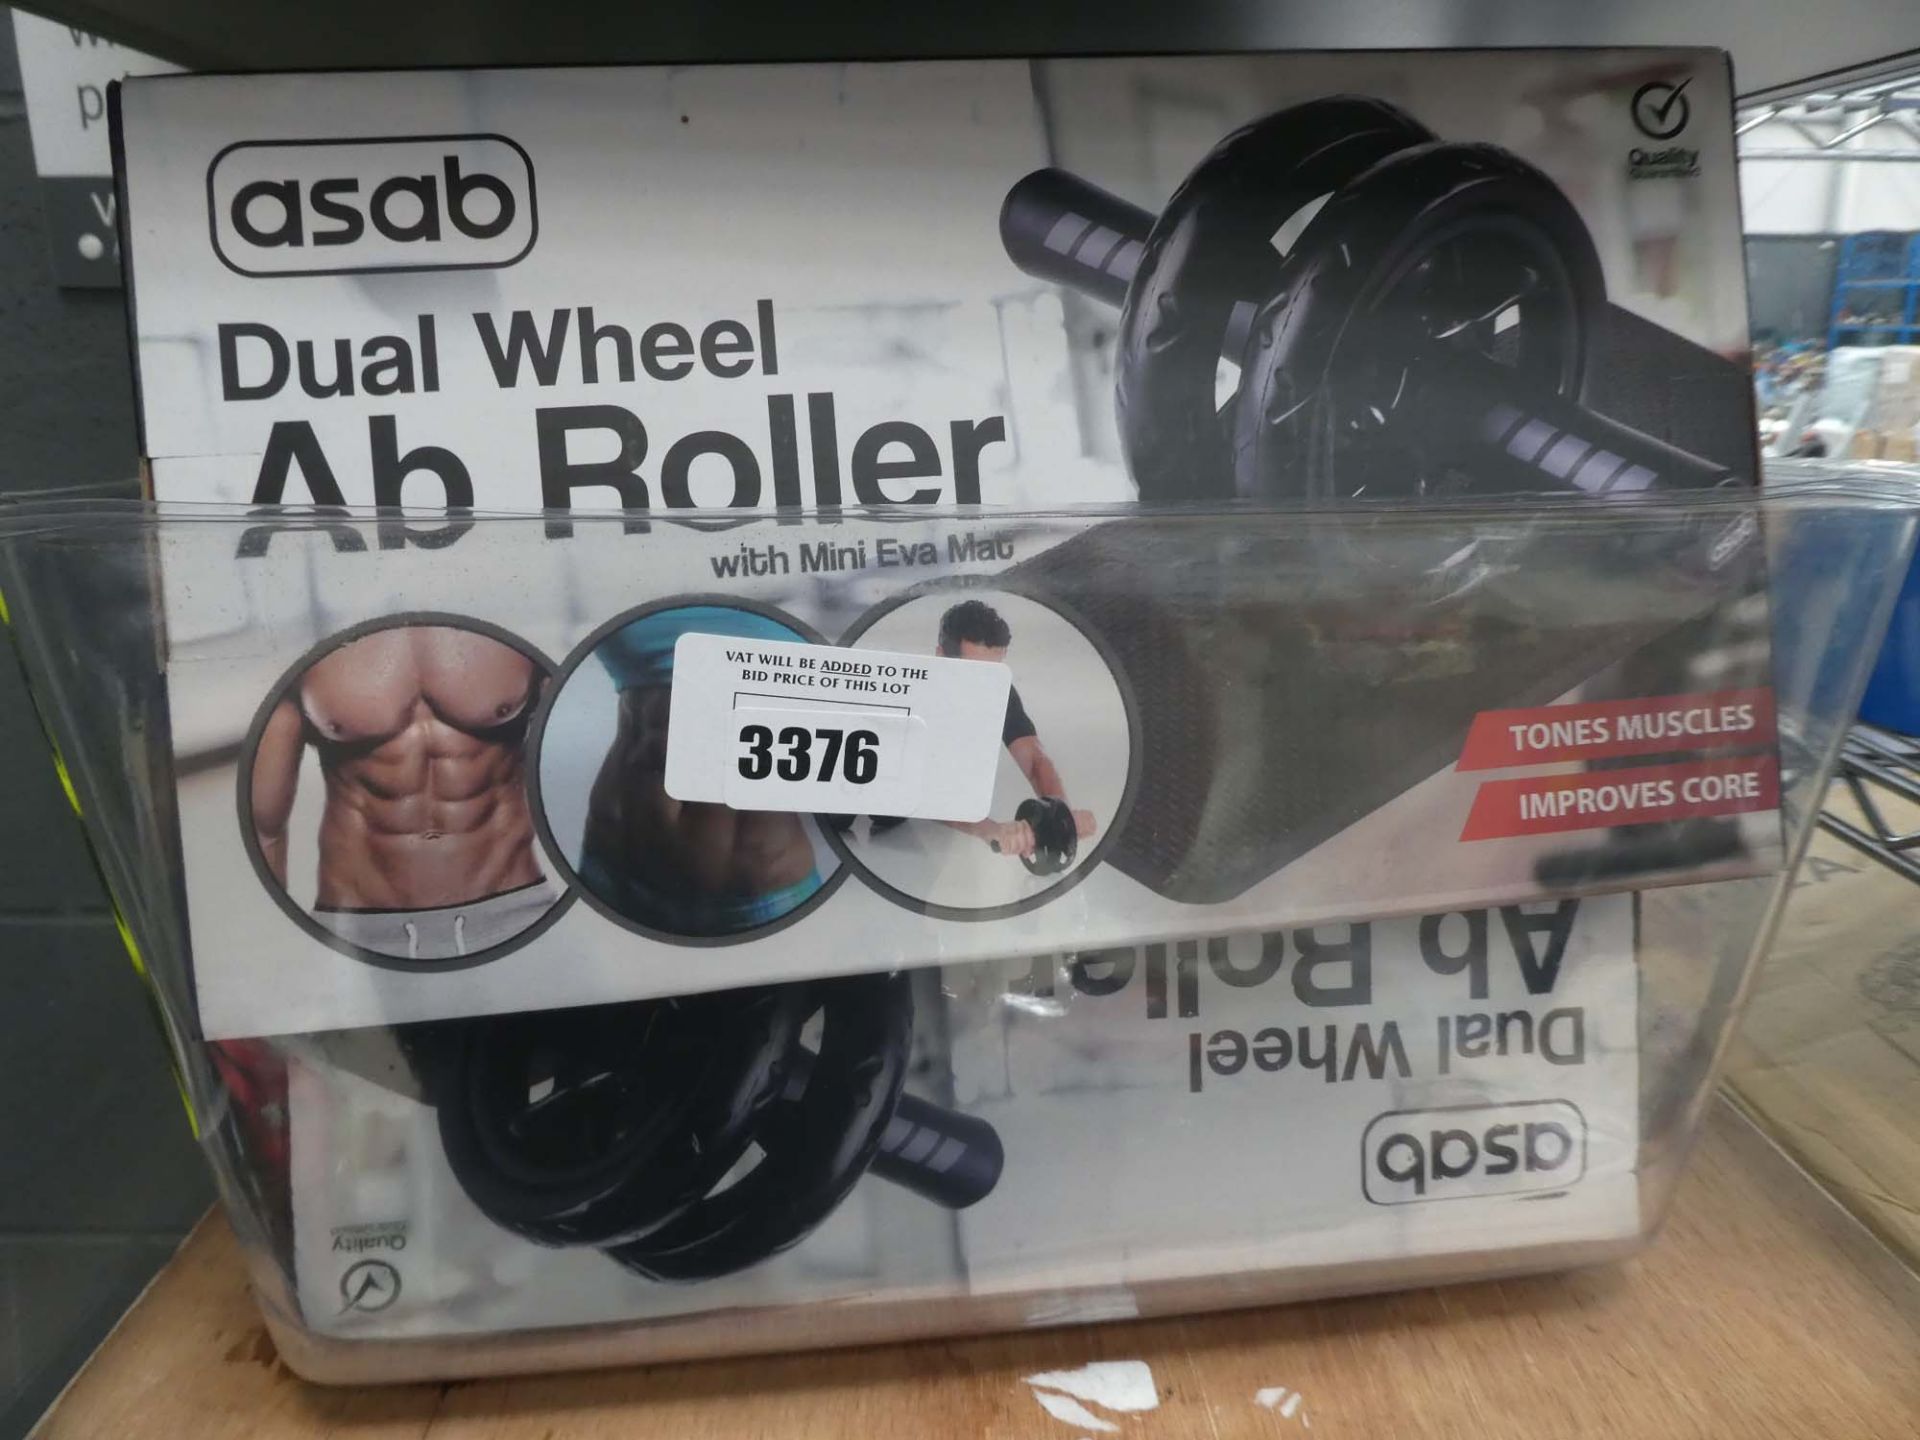 Box containing 4 ab rollers